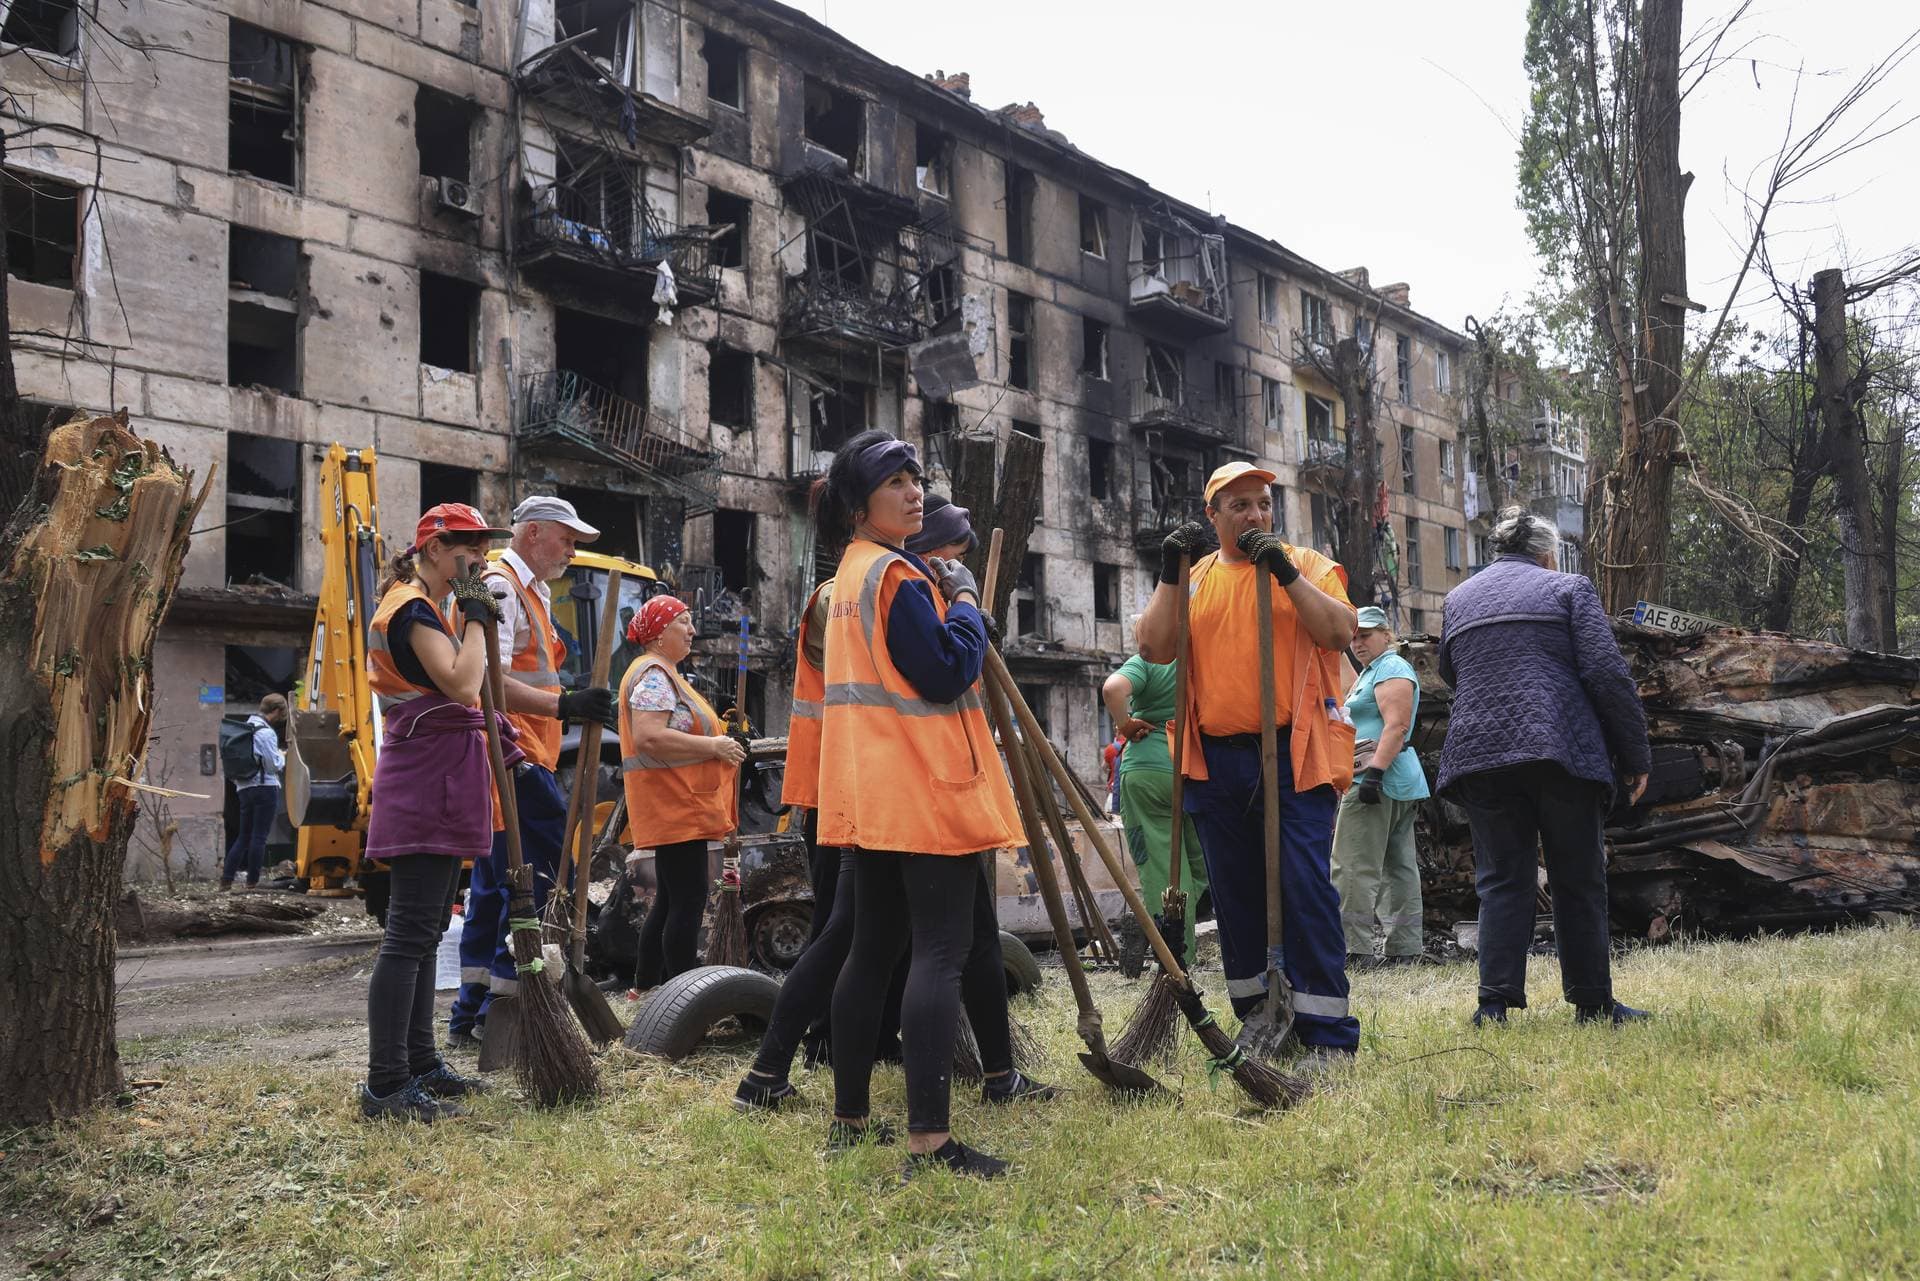 Municipal workers look at the scene of the latest Russian rocket attack that damaged a multi-storey apartment building in Kryvyi Rih